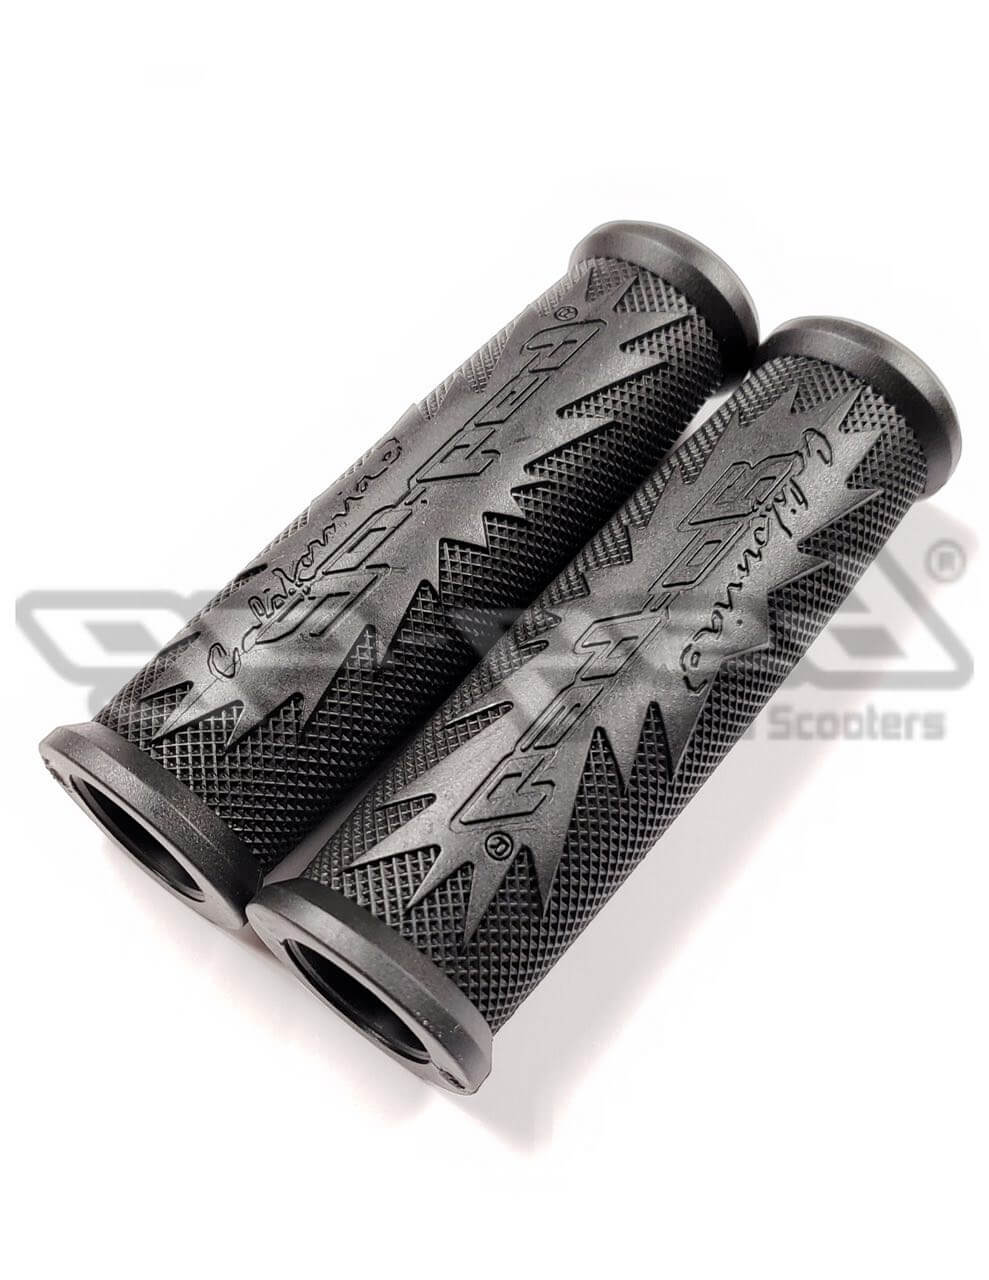 Go-Ped HANDLEBAR GRIP SET (1049) for Scooters